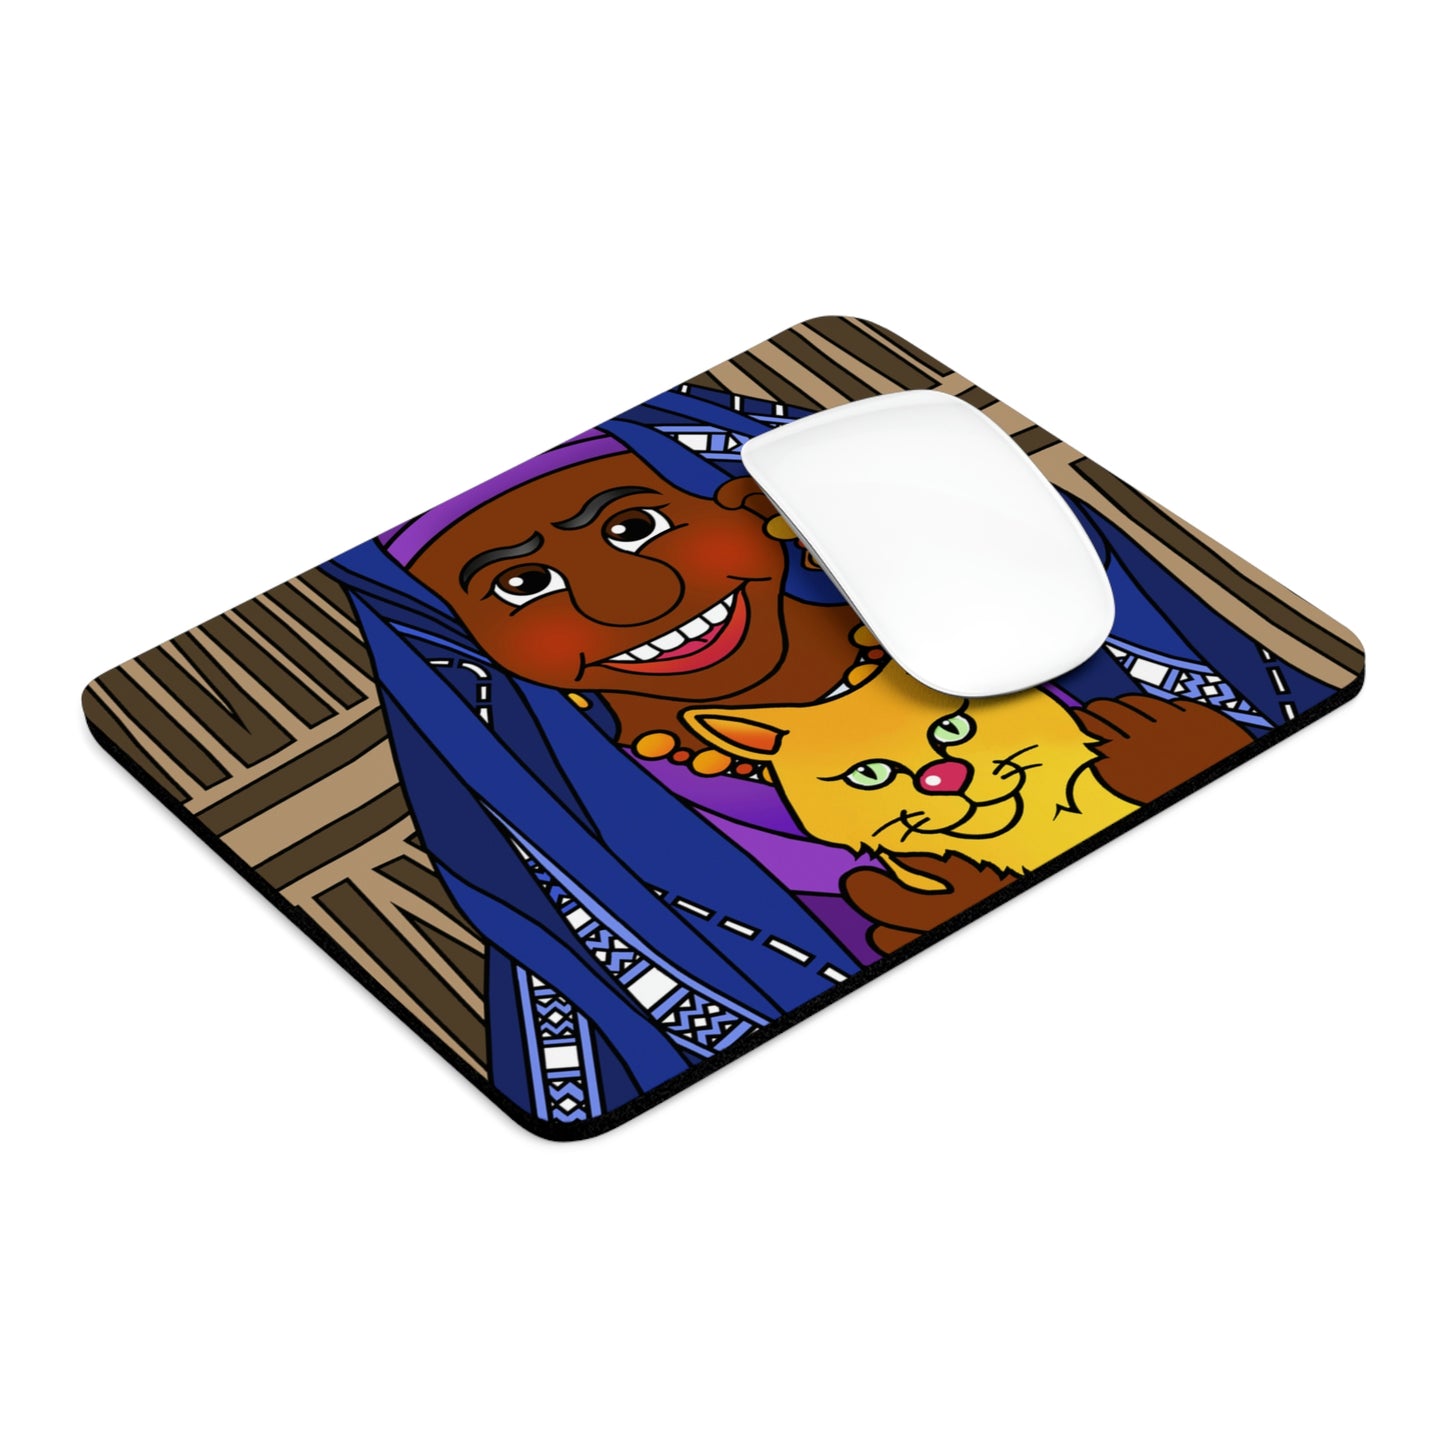 The Kitty Cat Cried Mouse Pad